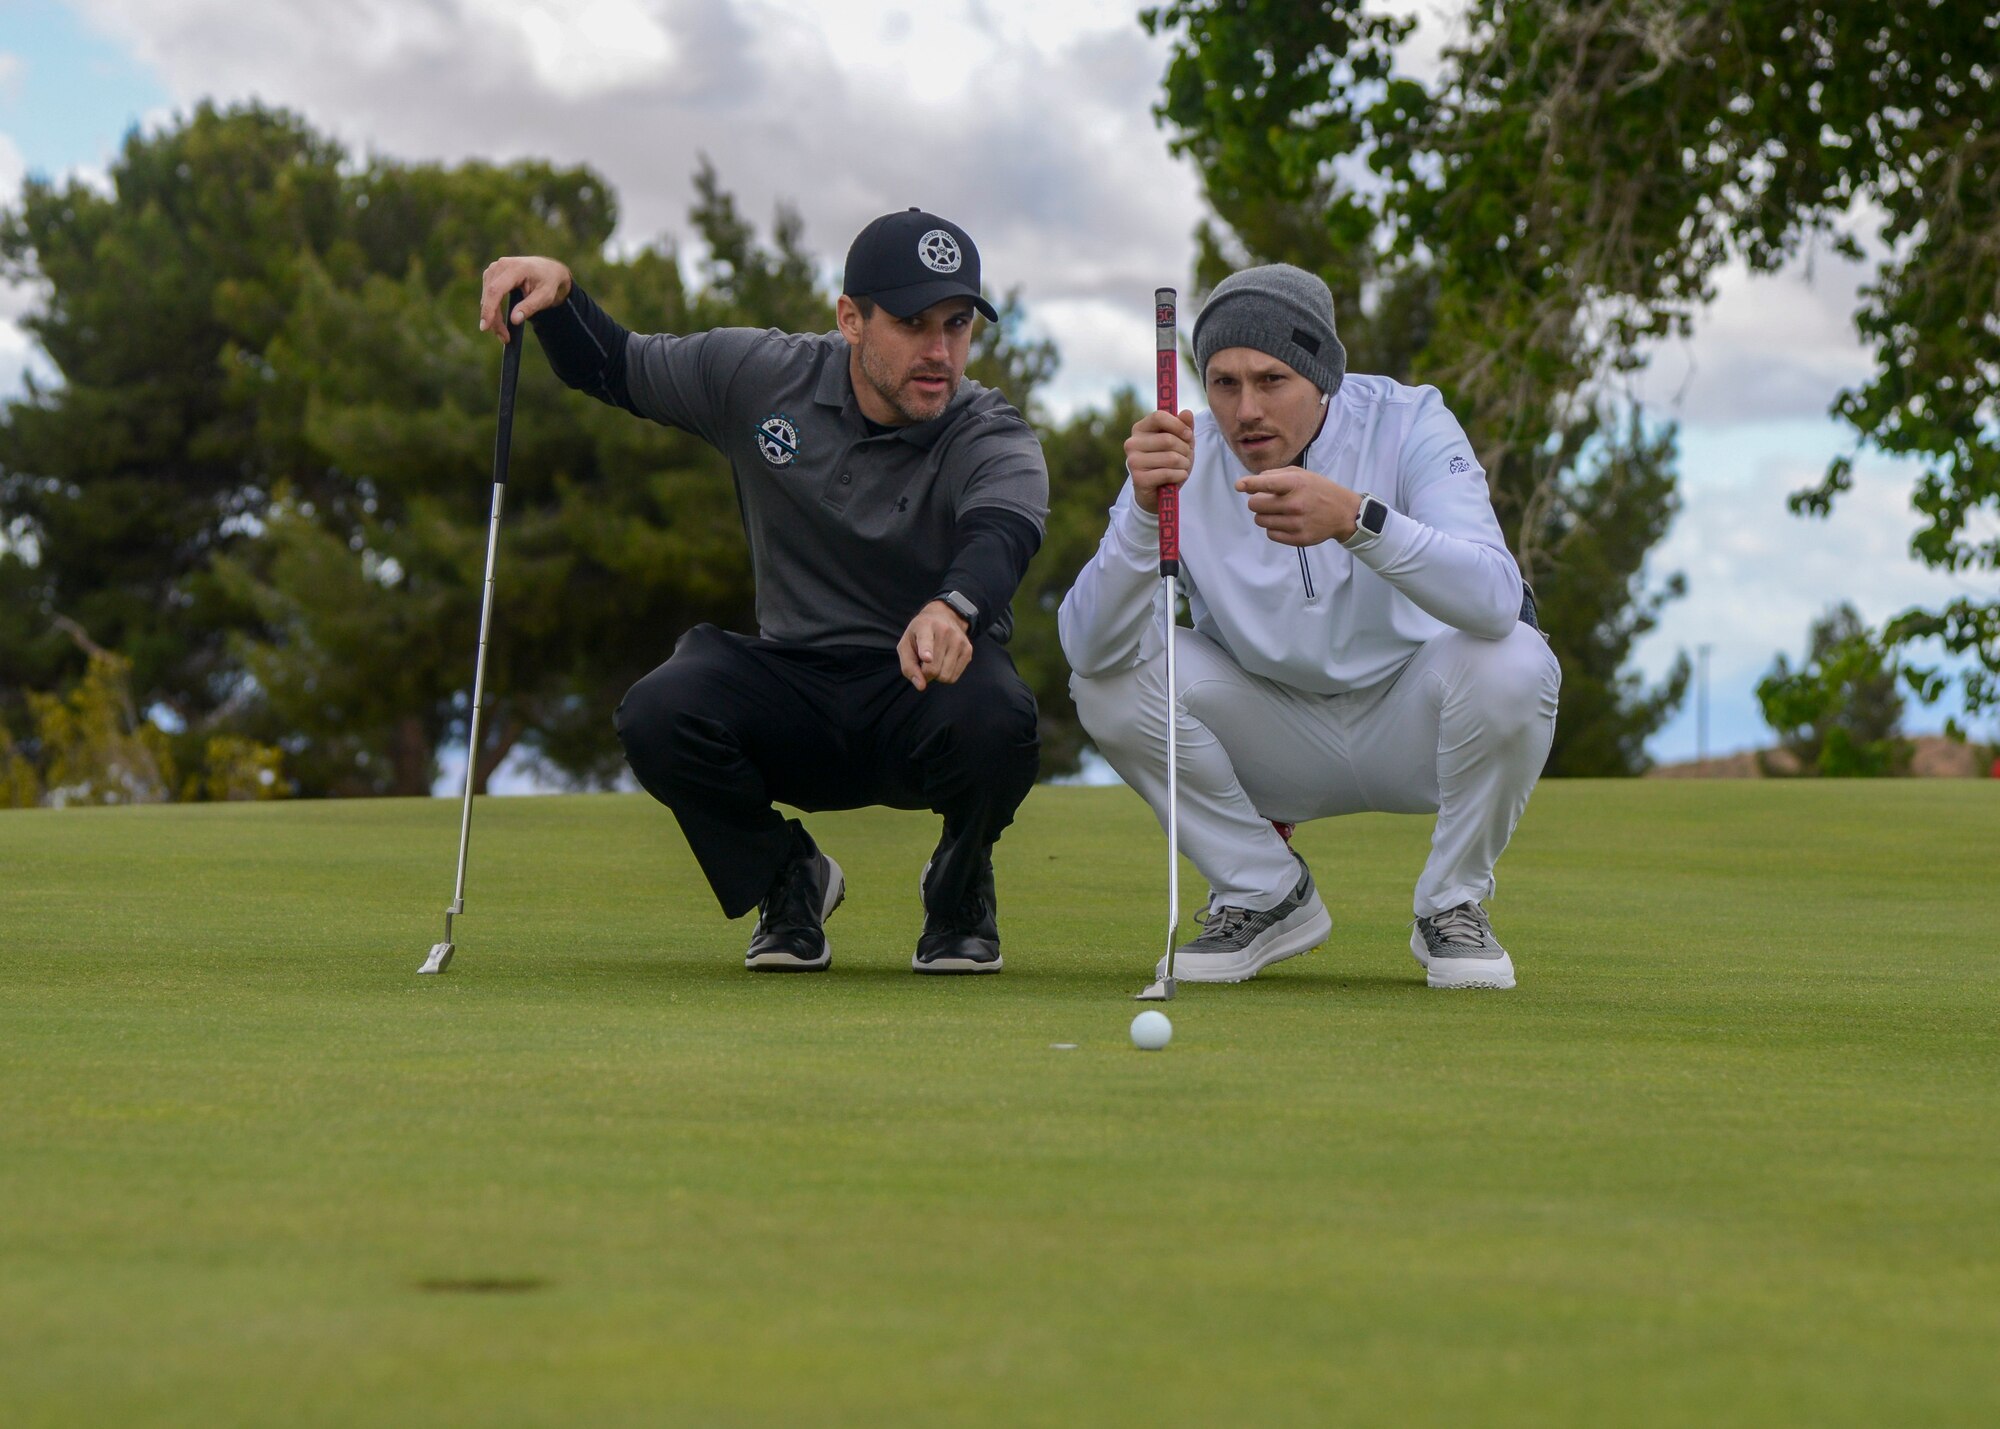 U.S. Marshal Zack Tyler and Joey Gonzalez discussing putting strategy during a golf tournament during Police Week, at Edwards Air Force Base, California, May 14. Police Week is observed May 13-17. (U.S. Air Force photo by Giancarlo Casem)